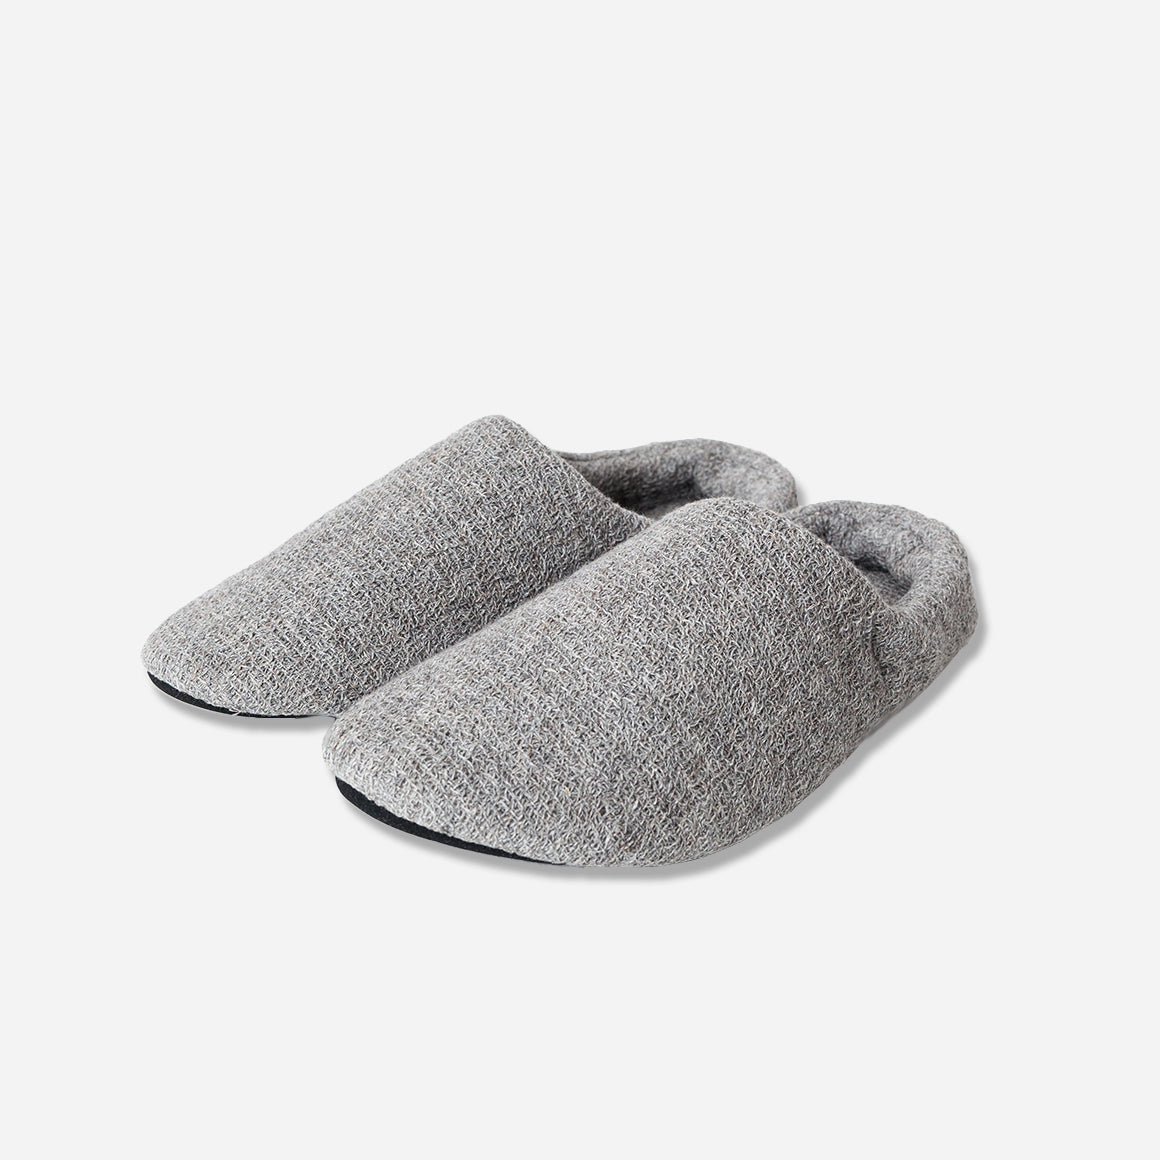 Angled view of grey slippers against white background.